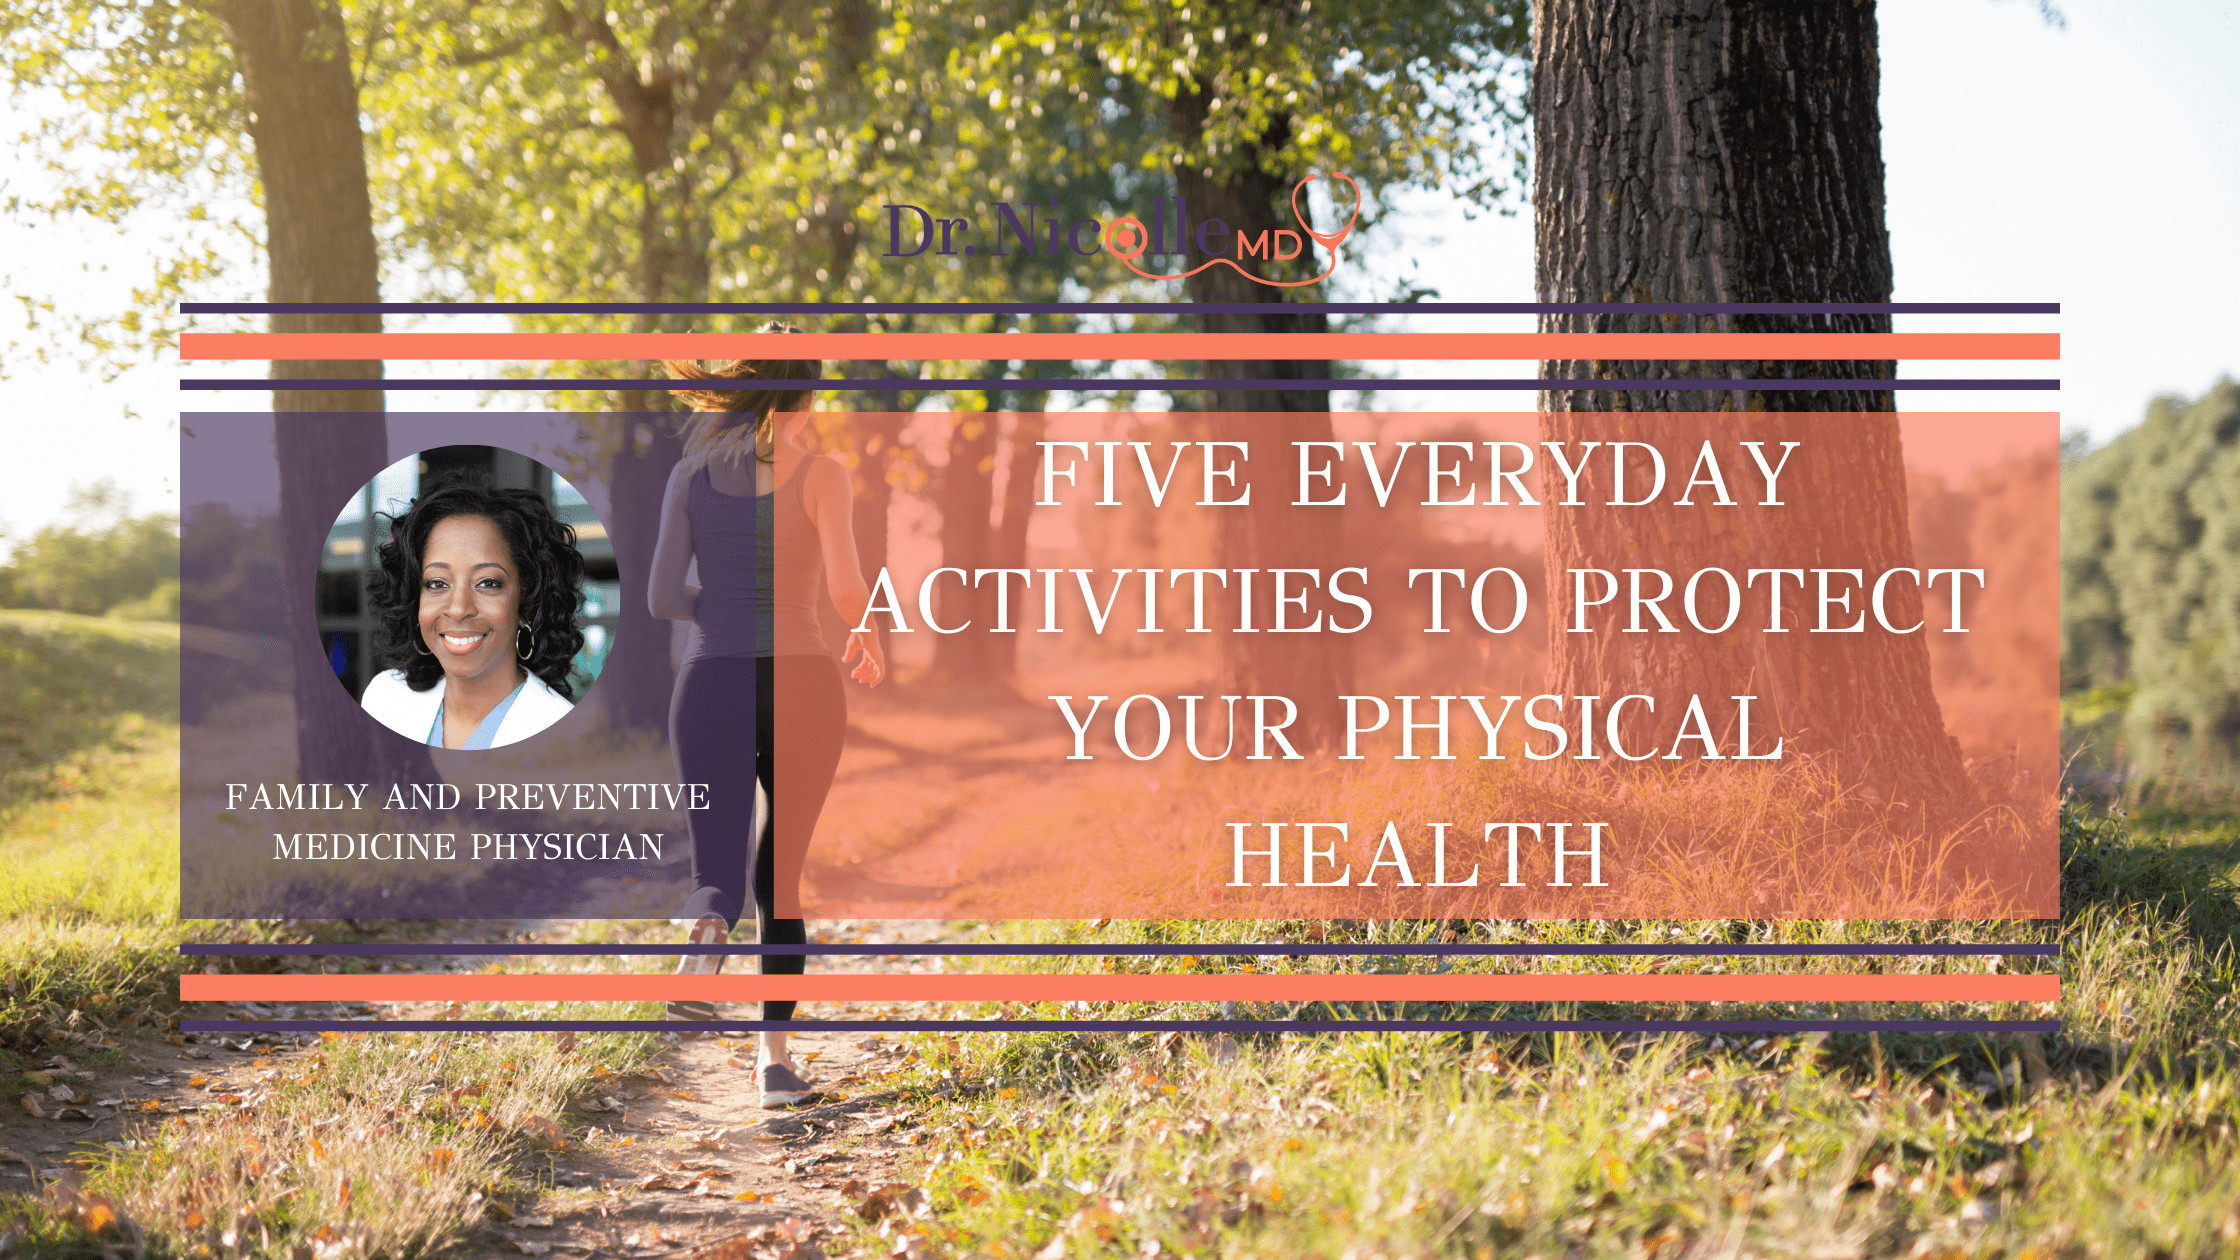 11Everyday Activities to Protect Physical Health